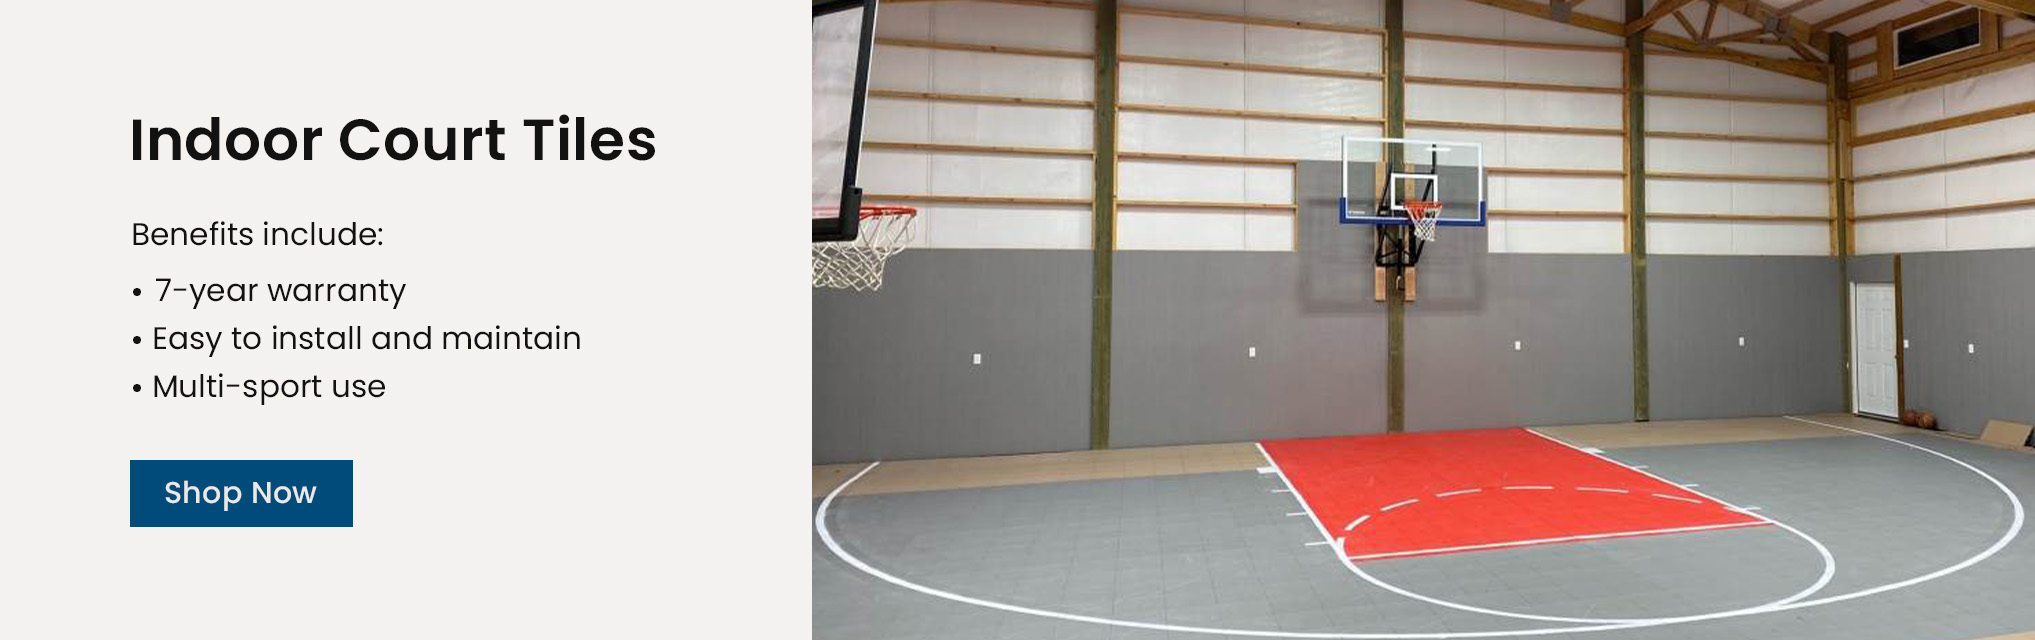 Indoor Court Tiles. Benefits include seven year warranty easy to install and maintain multi sport use. Shop Now